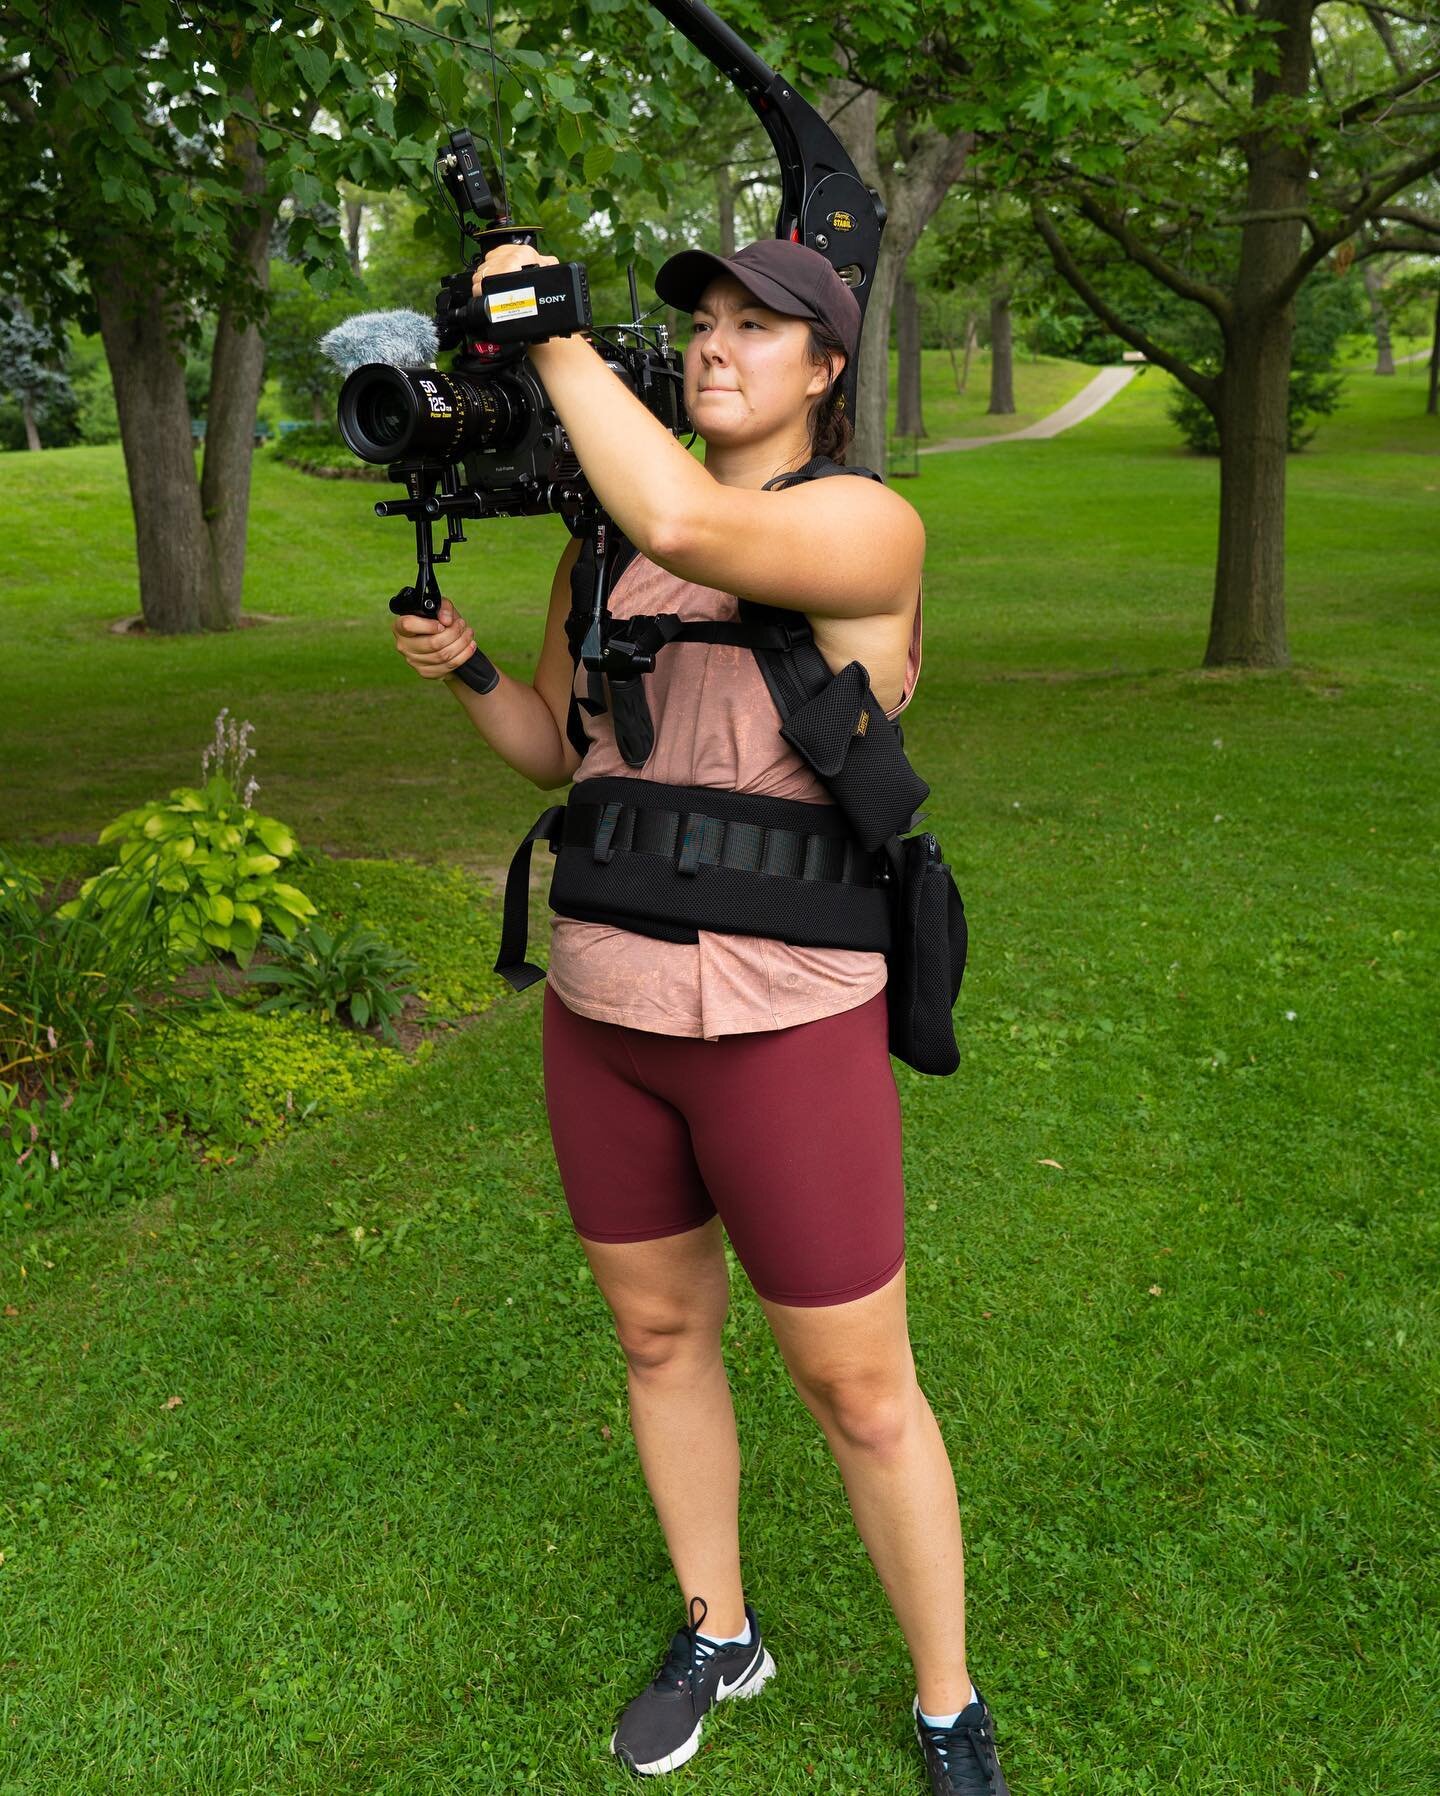 I think I wore this @easyrig almost the entire summer of 2022. And it smells like it. 😂
.
#camerawoman #dop #sony